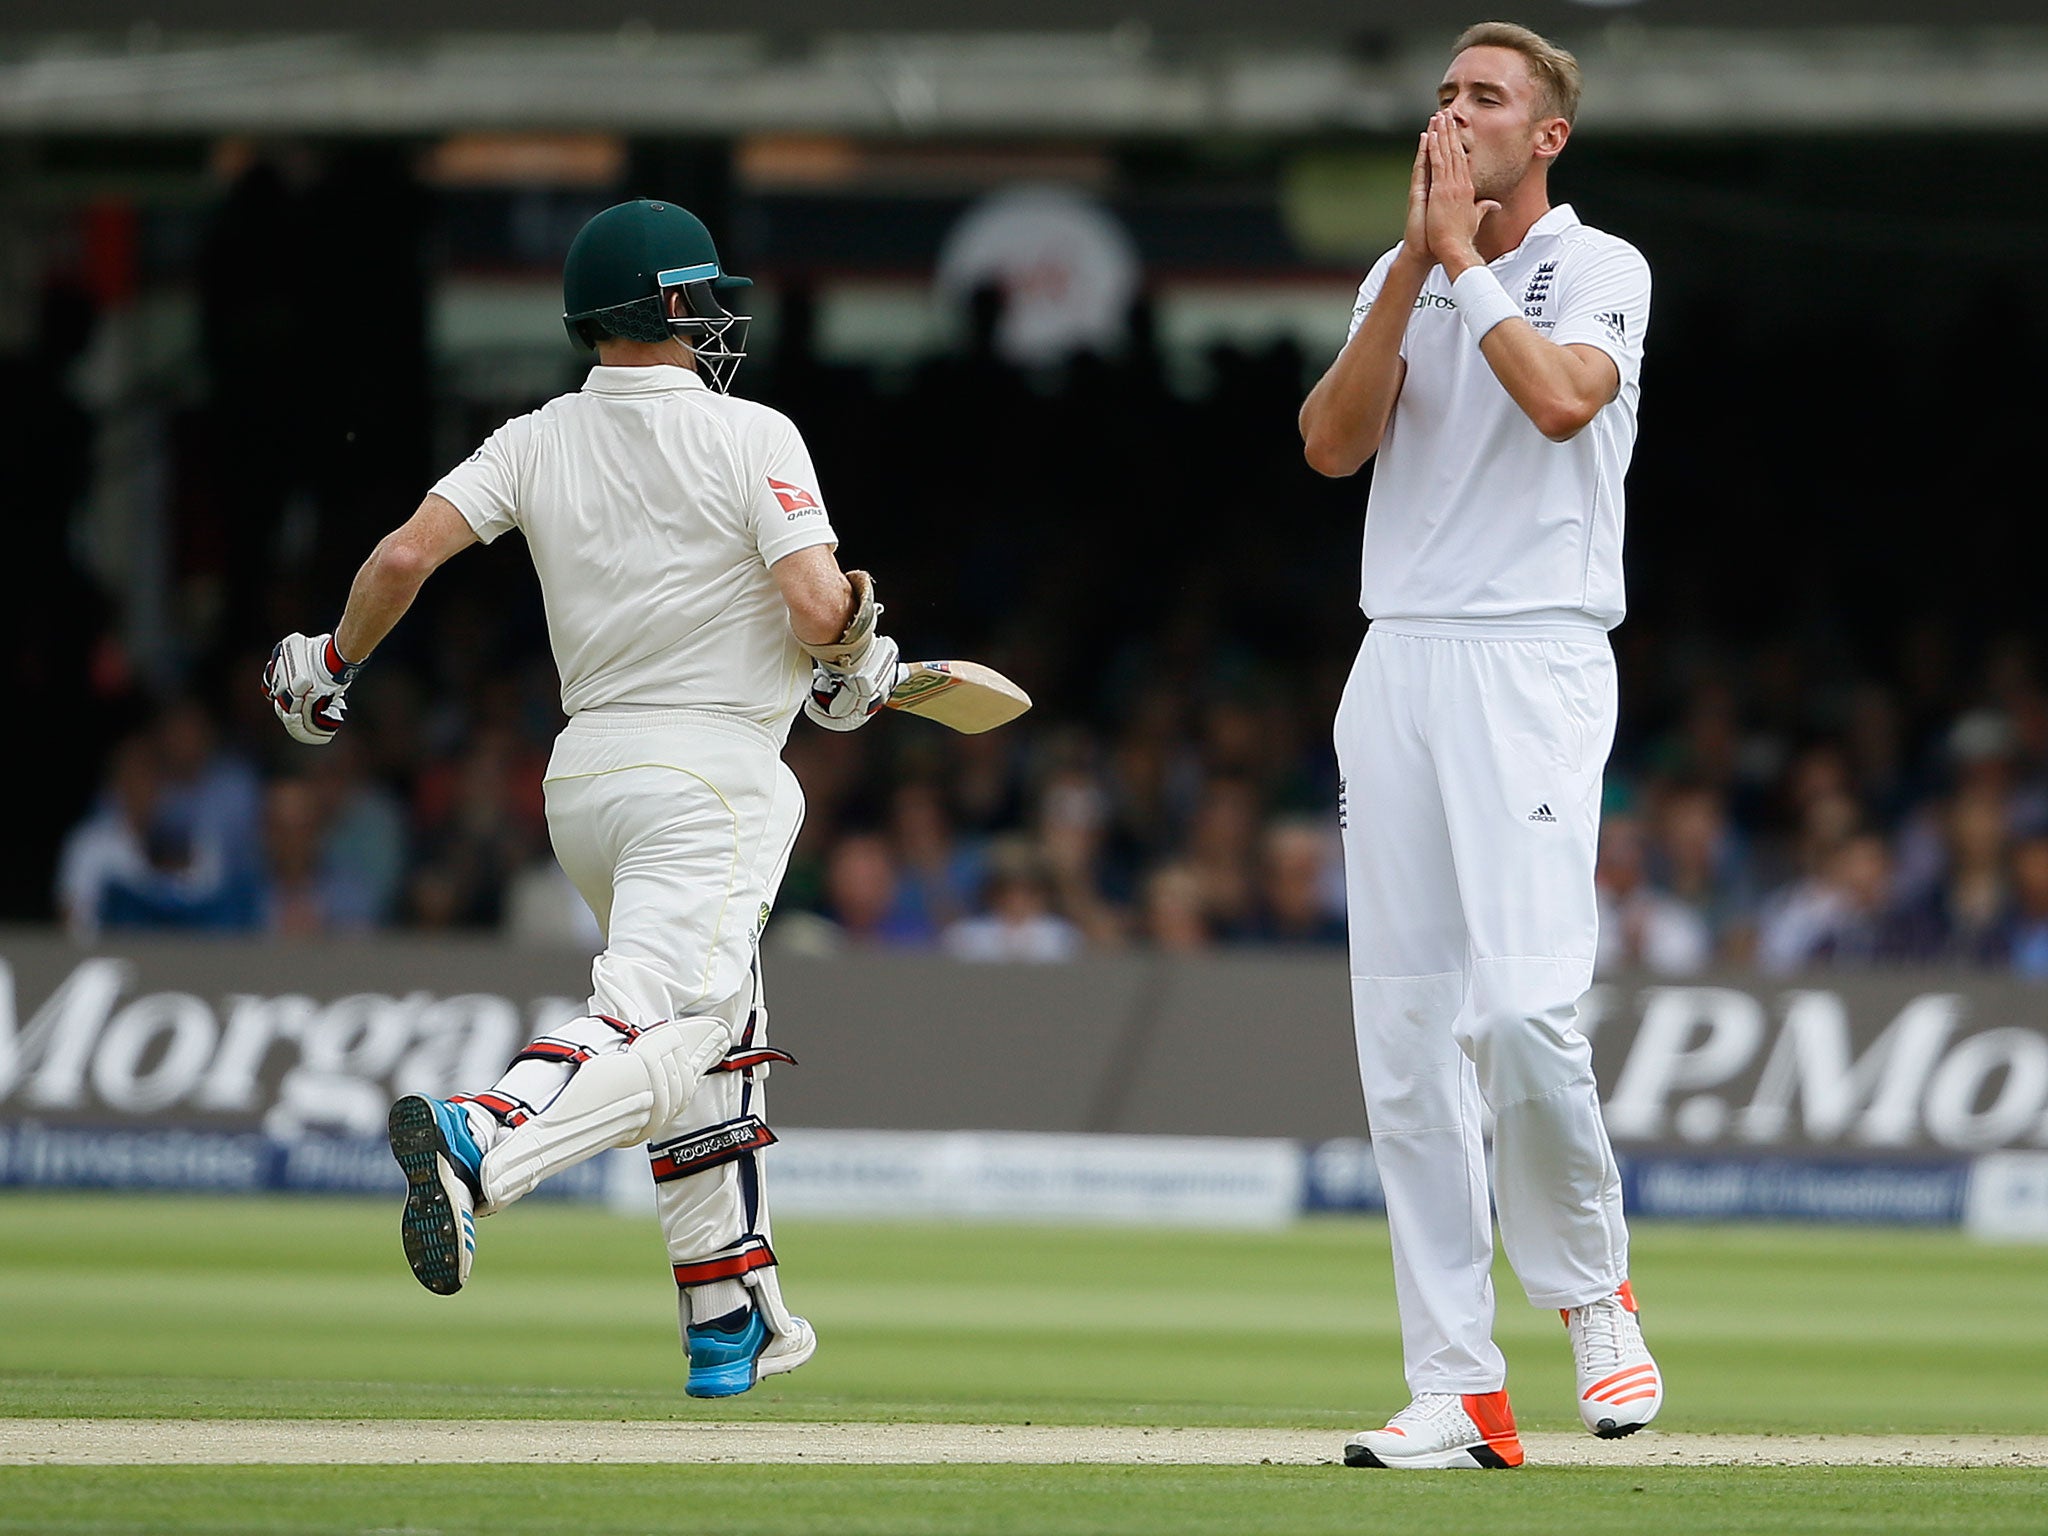 Chris Rogers piles on the Australian runs on the first day at Lord’s, to the frustration of bowler Stuart Broad